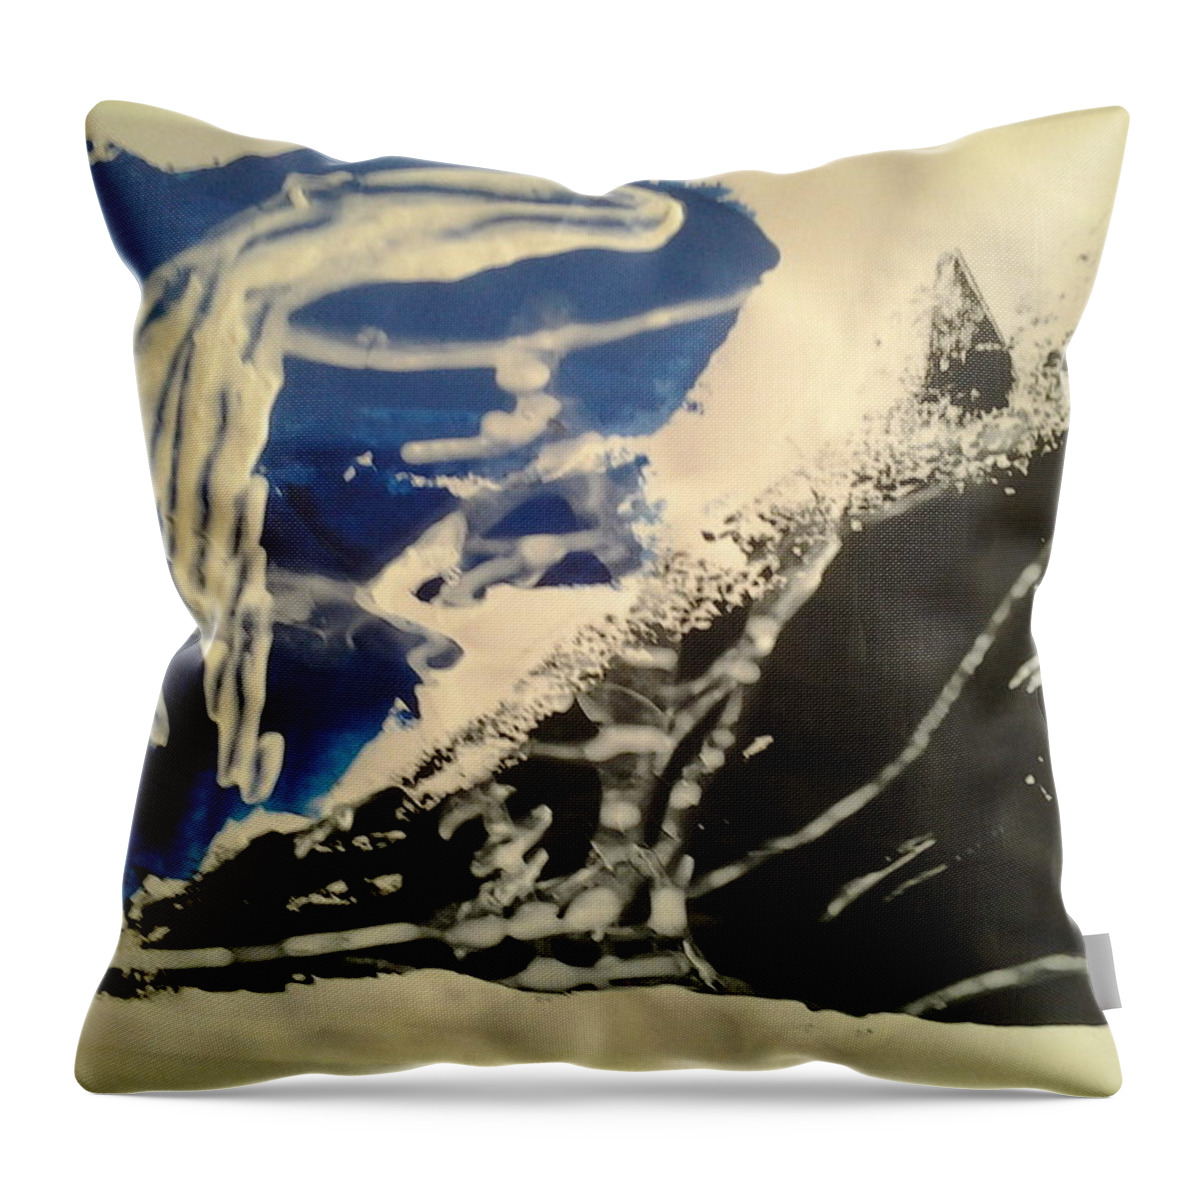 Abstract Throw Pillow featuring the painting Caos37 by Giuseppe Monti